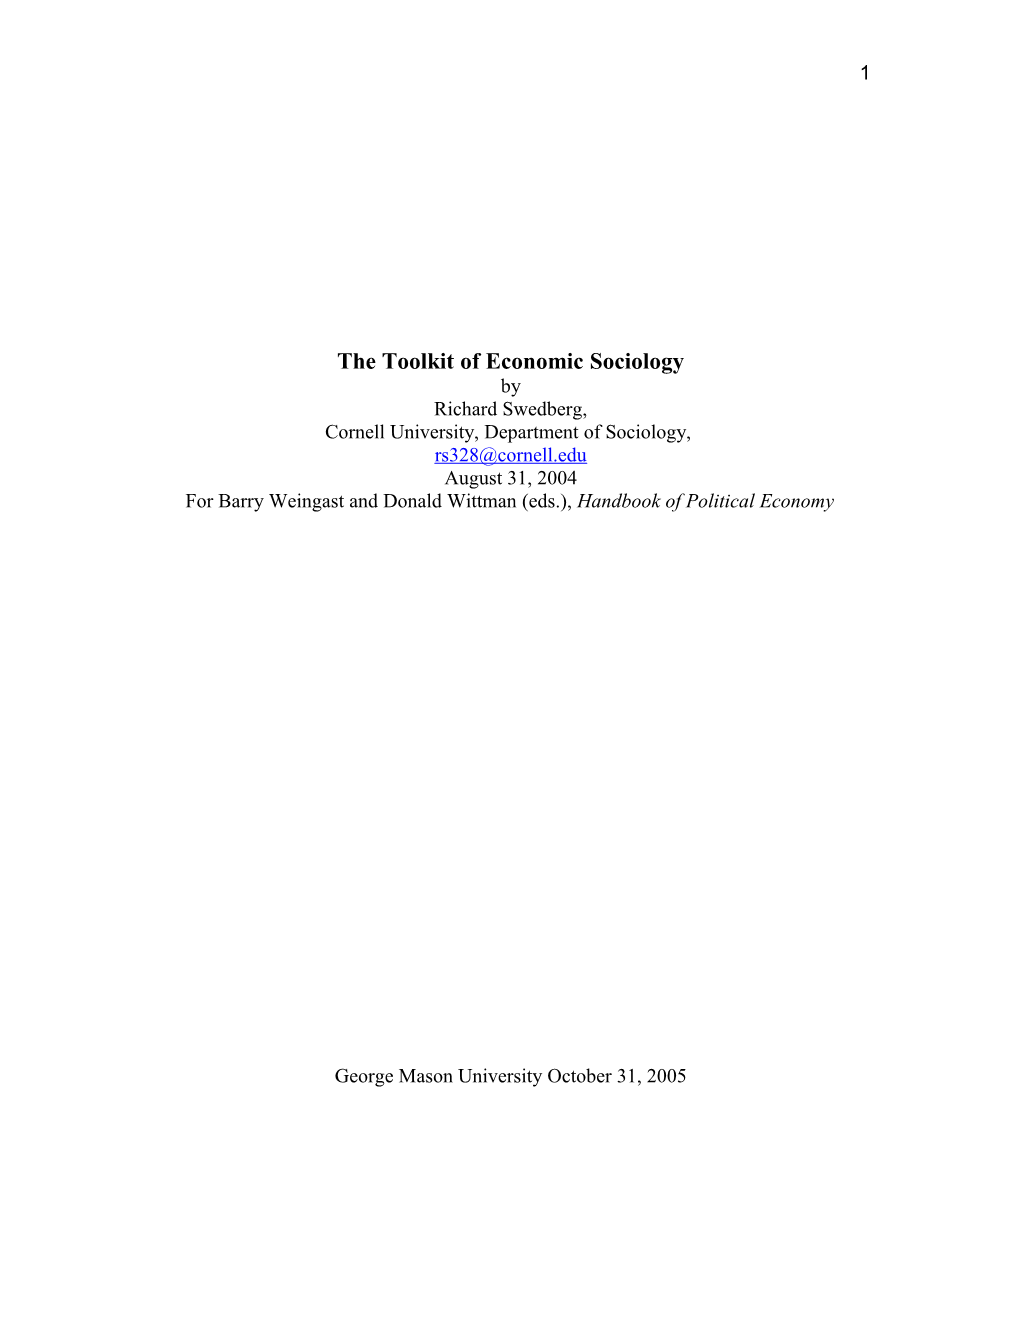 The Toolkit of Economic Sociology